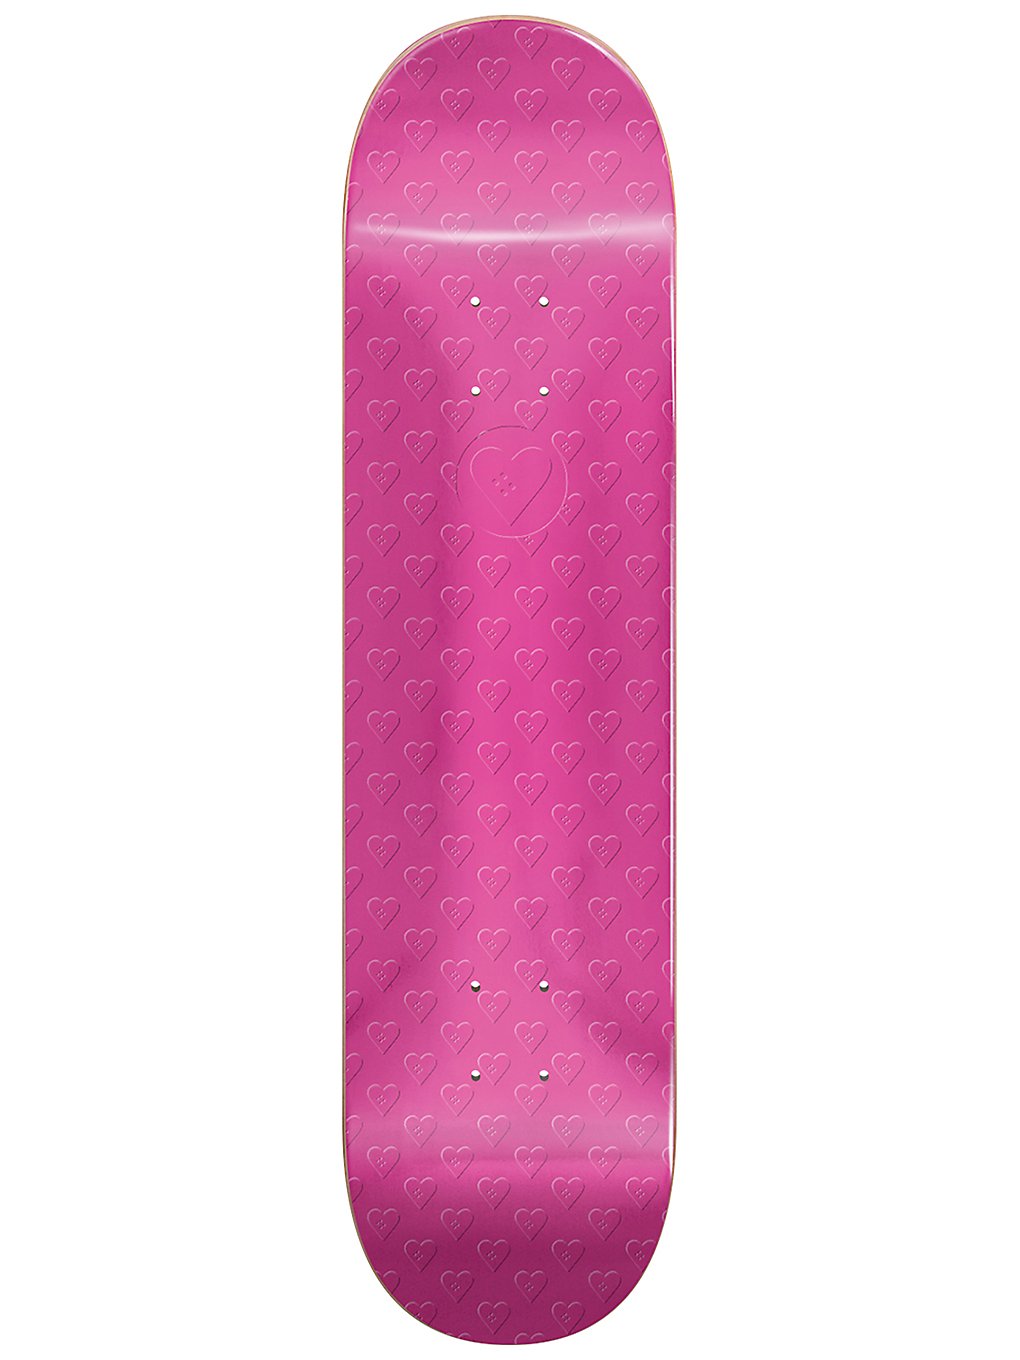 Heart Supply Cosmic Sweethearts 7.75 Skateboard Deck pearlescent pink